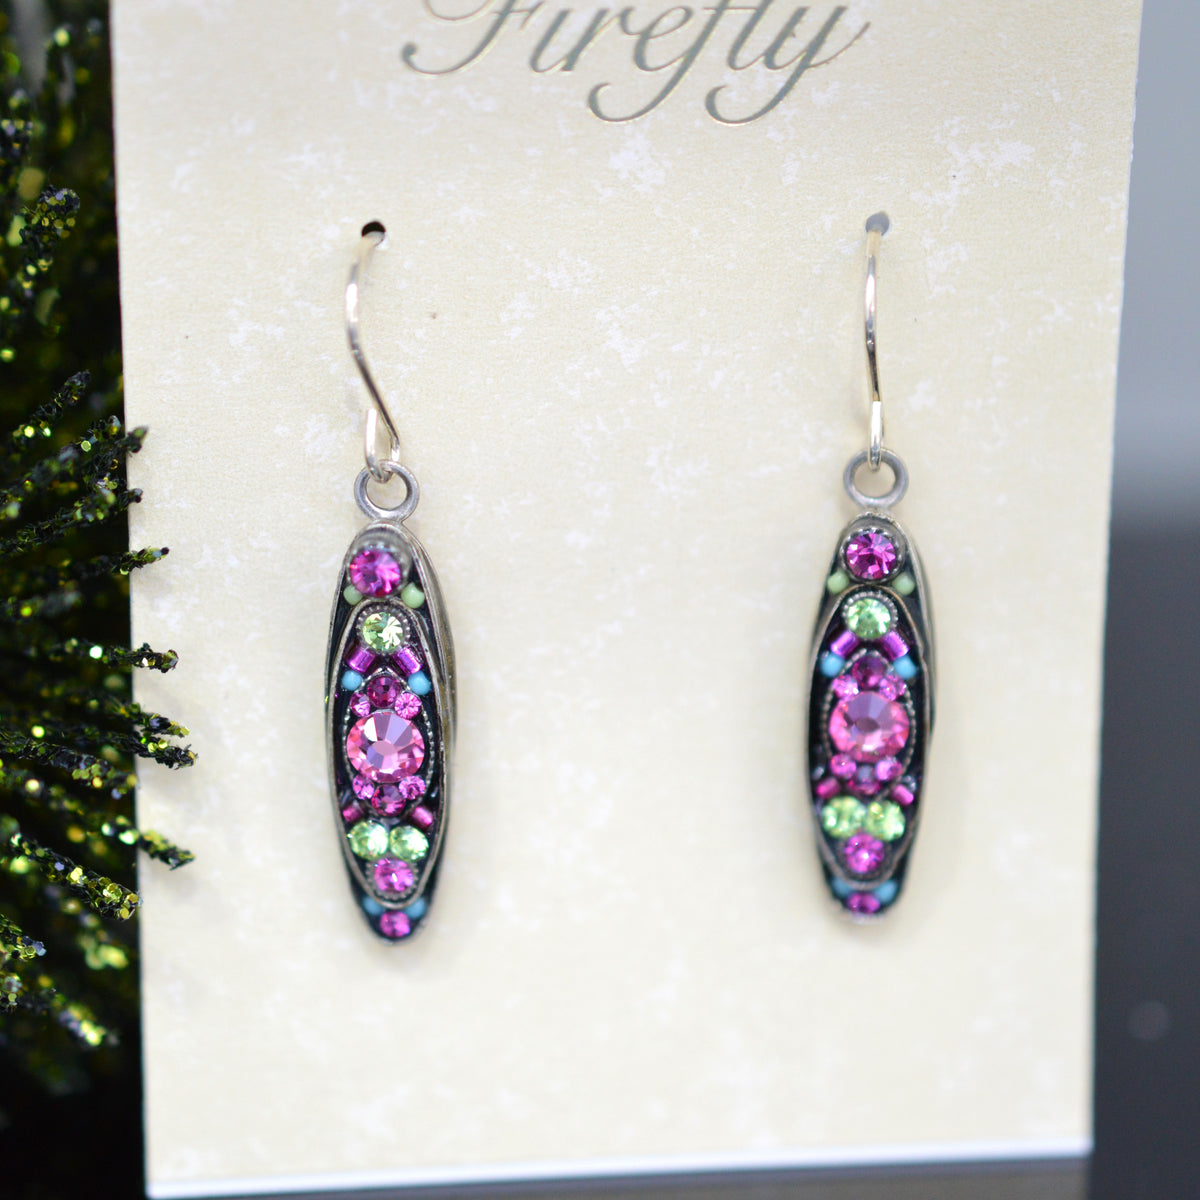 Antique Silver Plated Rose Crystal Long Oval Earrings by Firefly